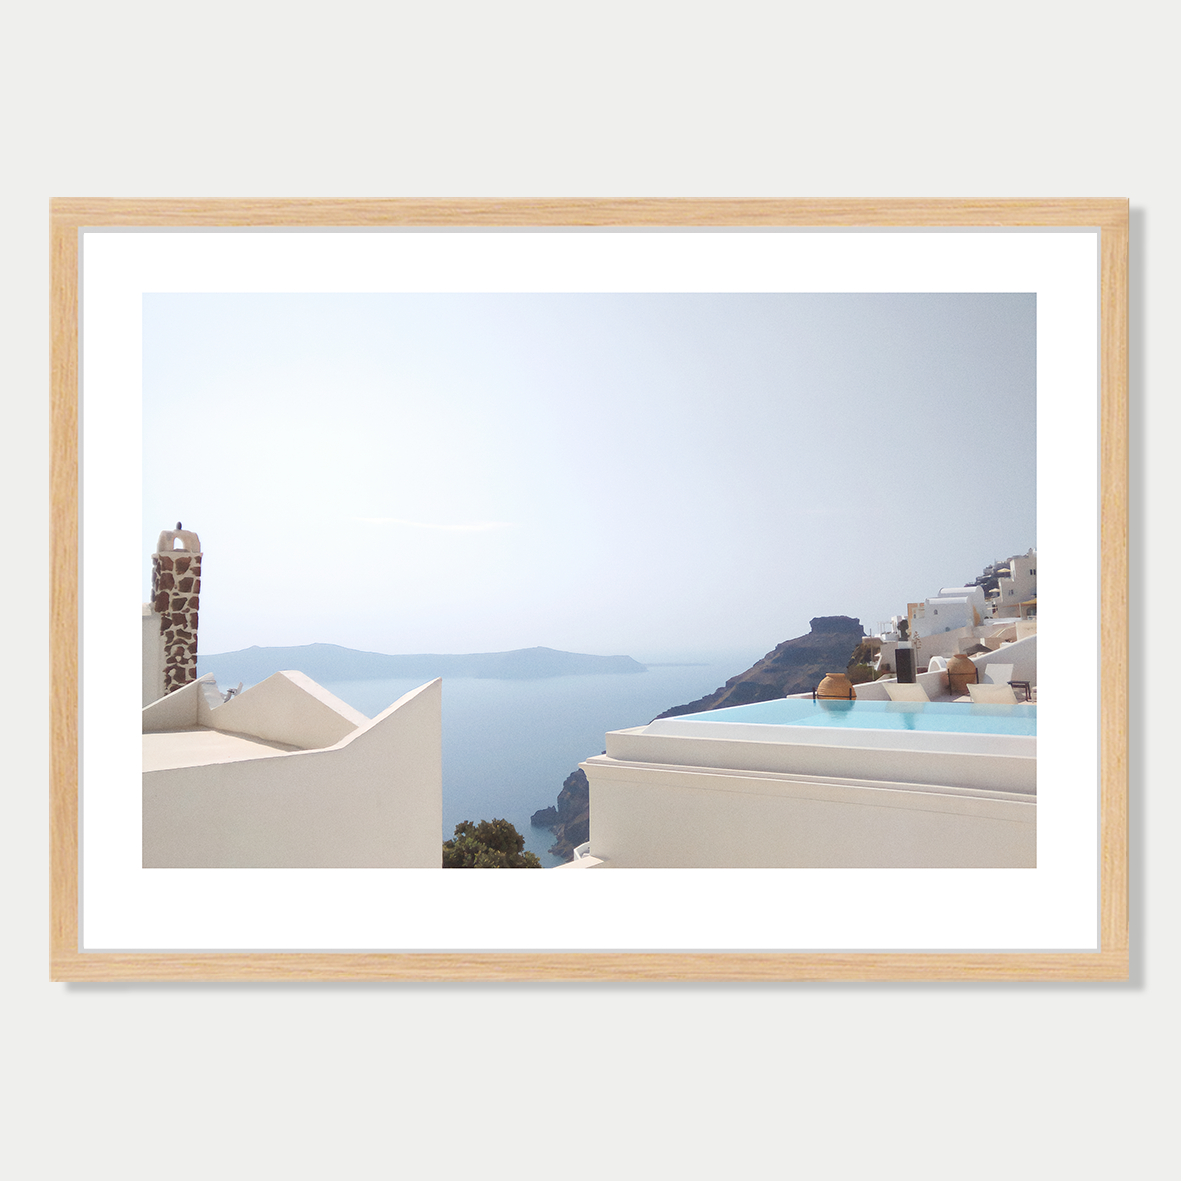 Infinity Pool and Beautiful View - Still Life in Santorini, Greece, Photographic Art Print in a Skinny Raw Frame